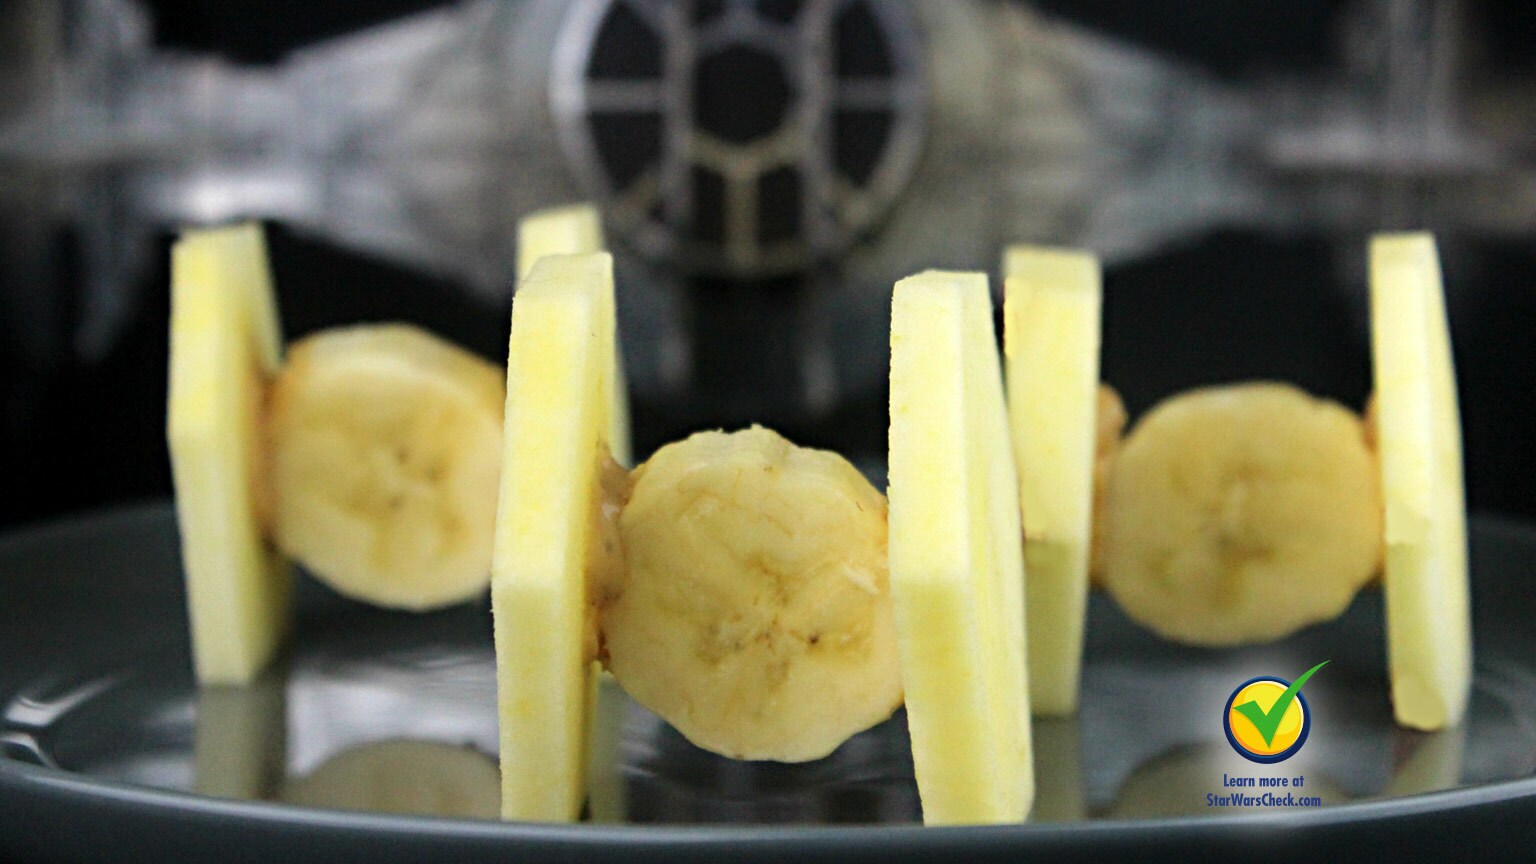 You Can't Shake the Flavor of These Fruit TIE Fighters